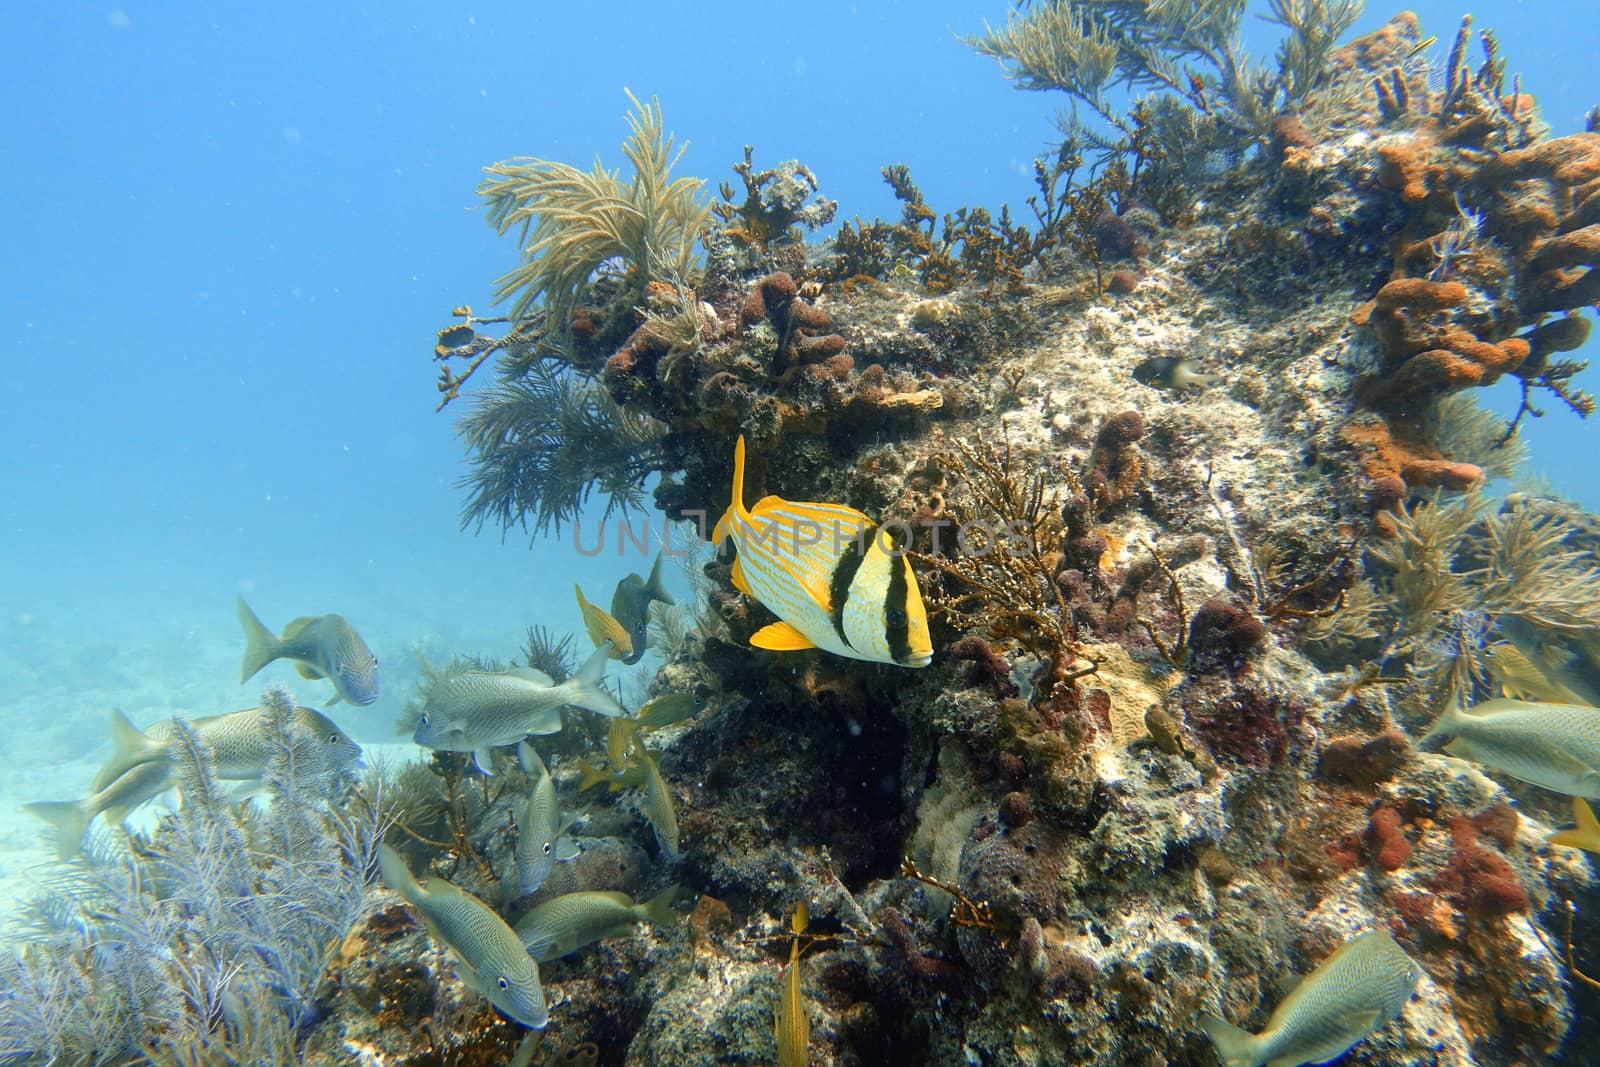 An underwater photo of a Porkfish or Anisotremus virginicus, which is a species of grunt native to the western Atlantic Ocean, Caribbean Sea and Gulf of Mexico.